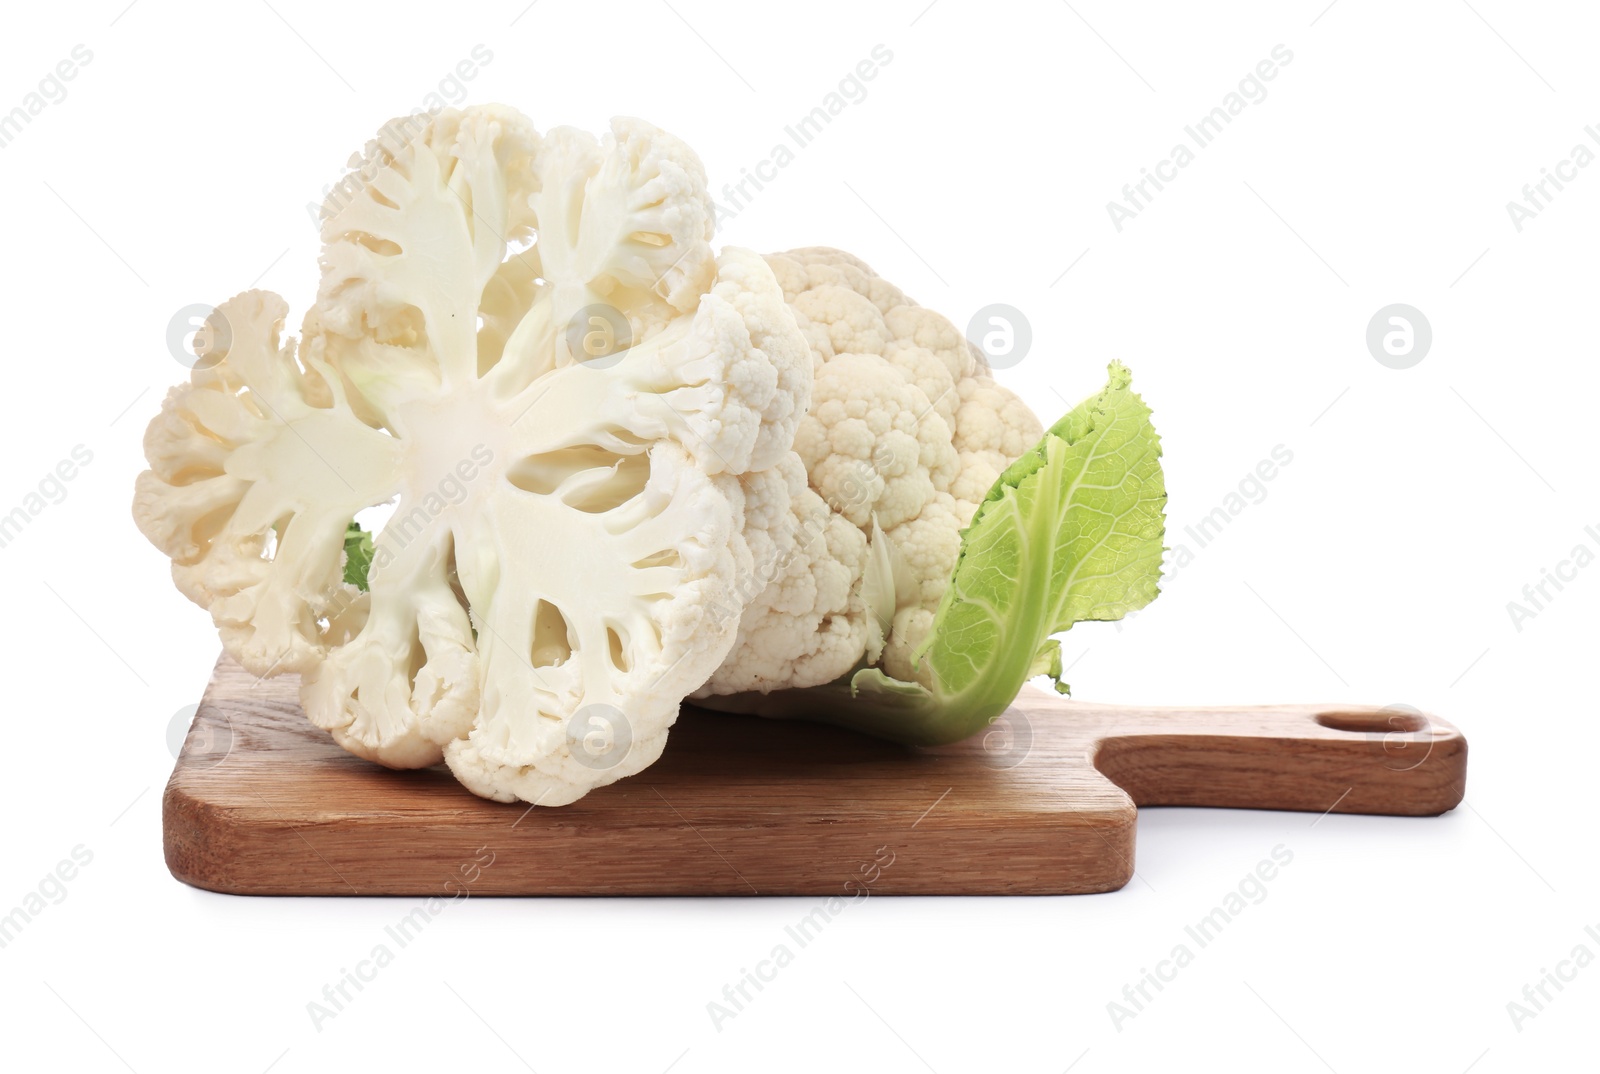 Photo of Wooden board with cut and whole cauliflowers on white background